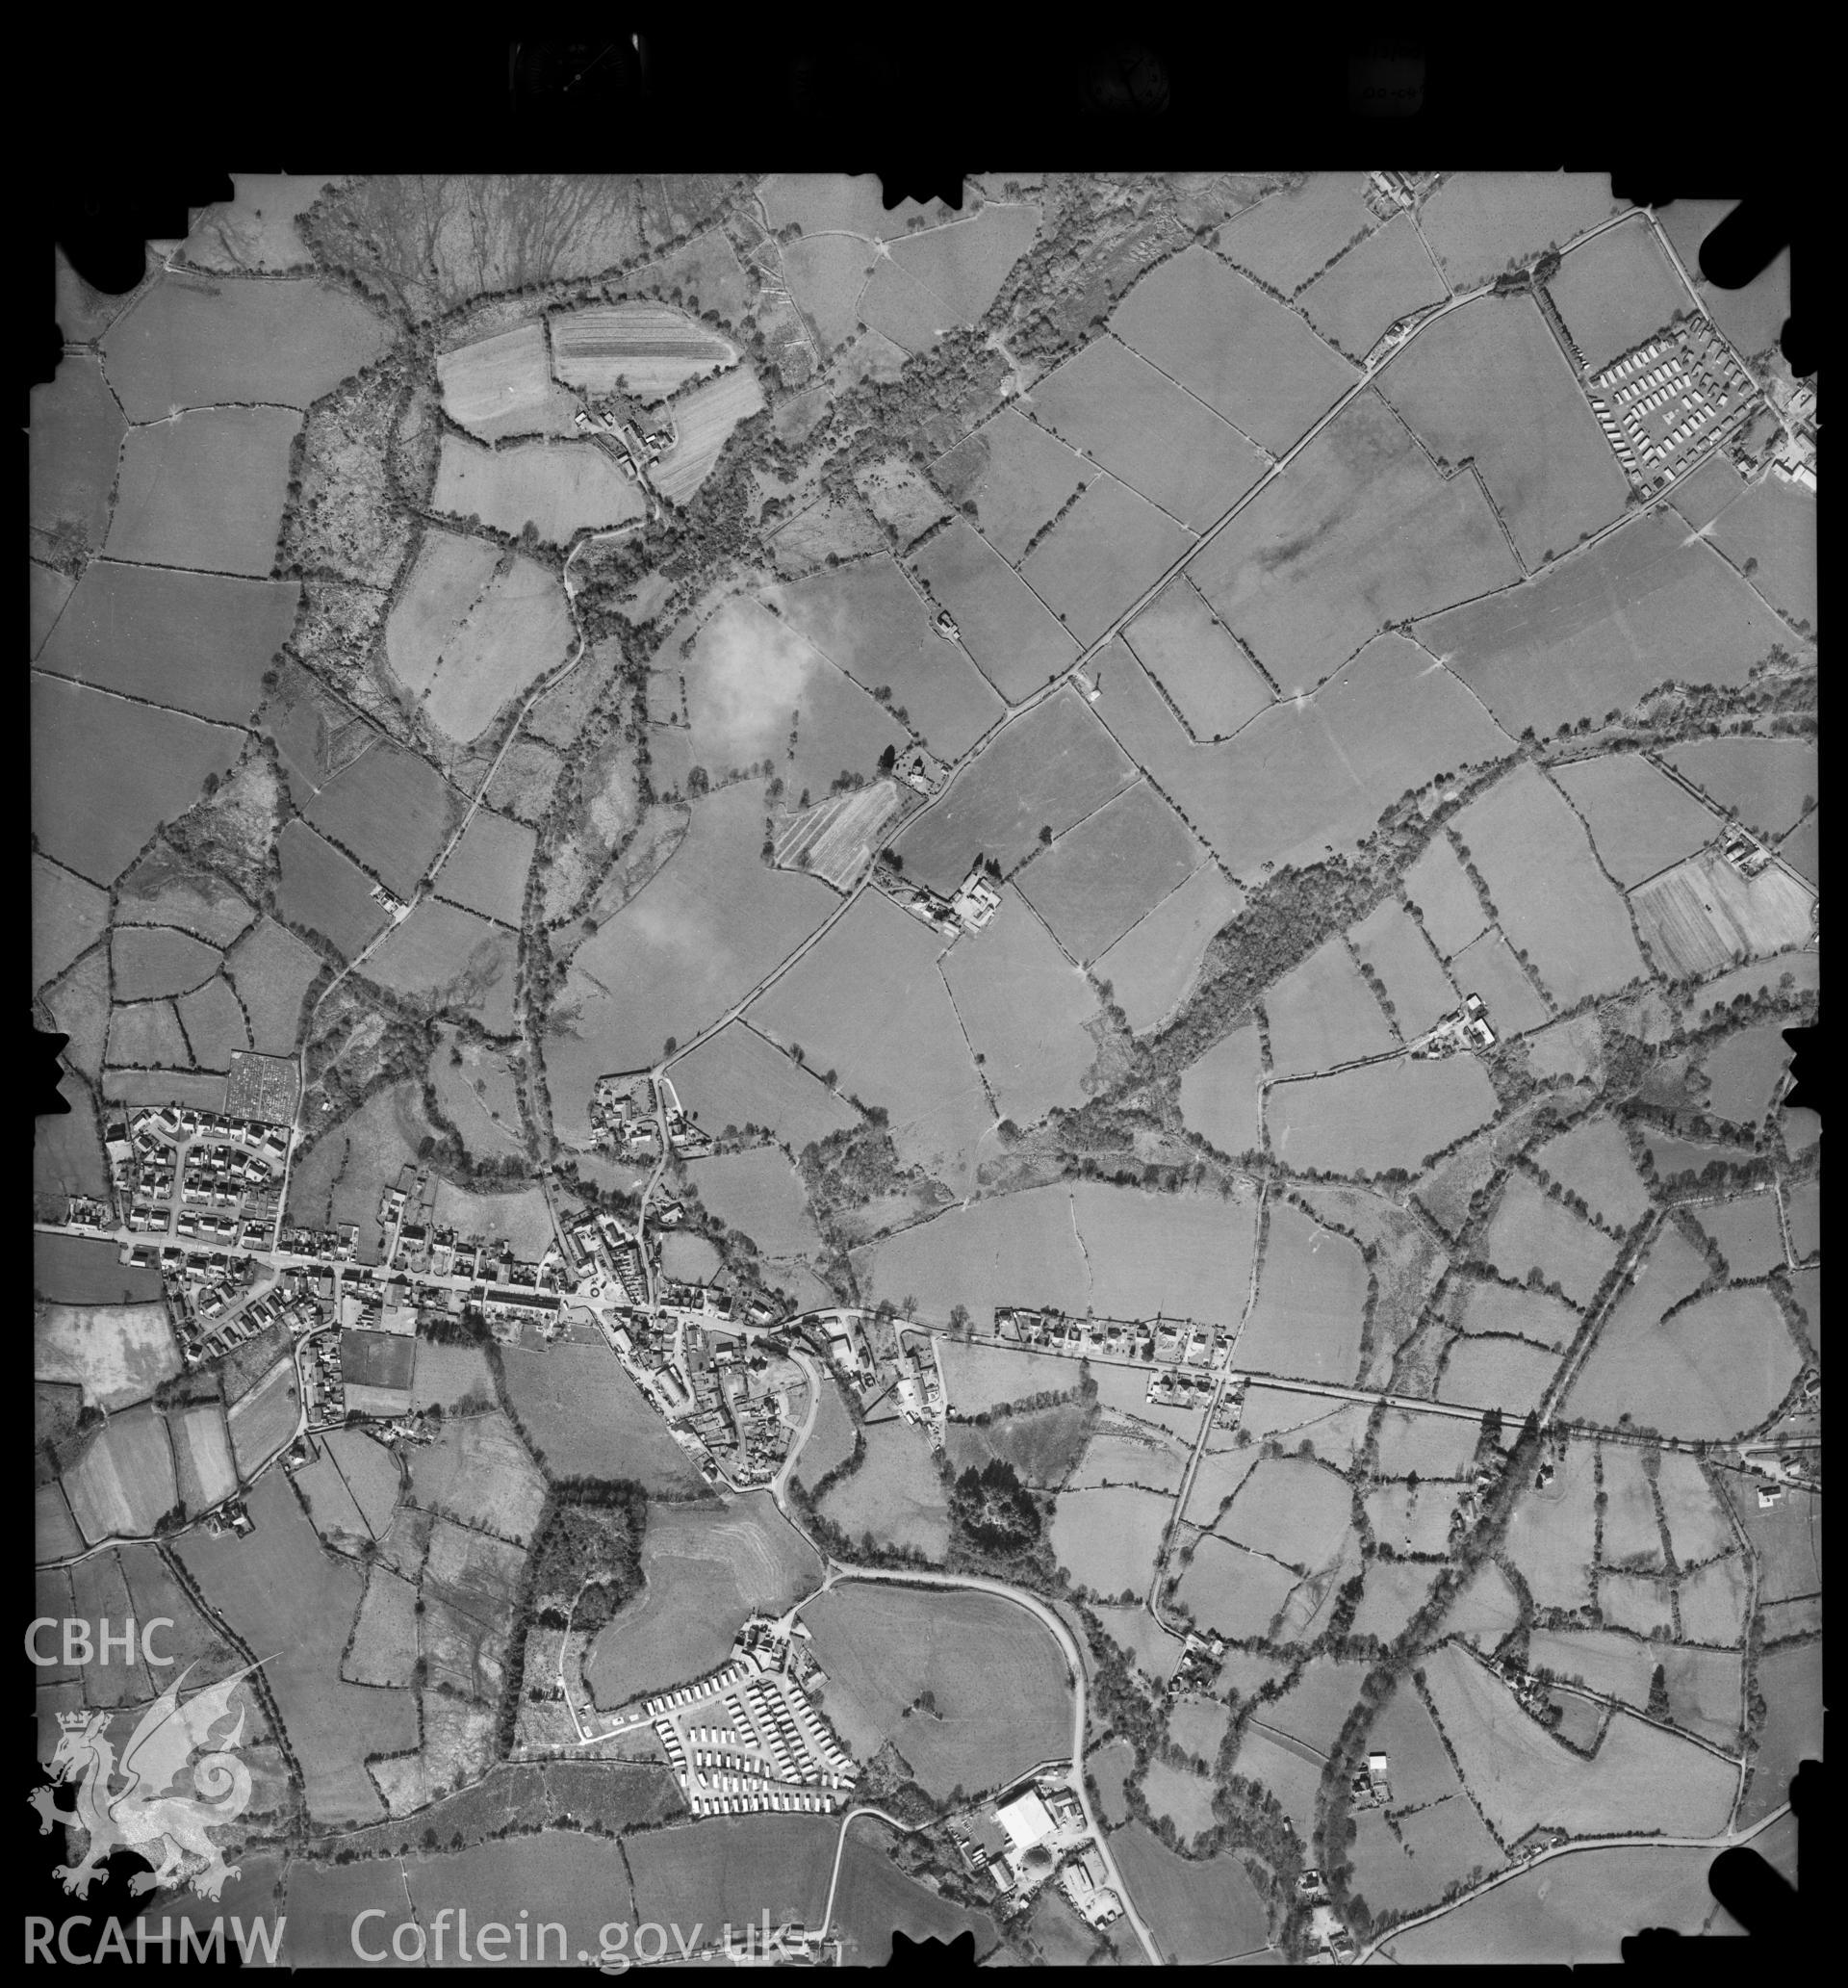 Digitized copy of an aerial photograph showing the South Lleyn area, taken by Ordnance Survey, 2000.